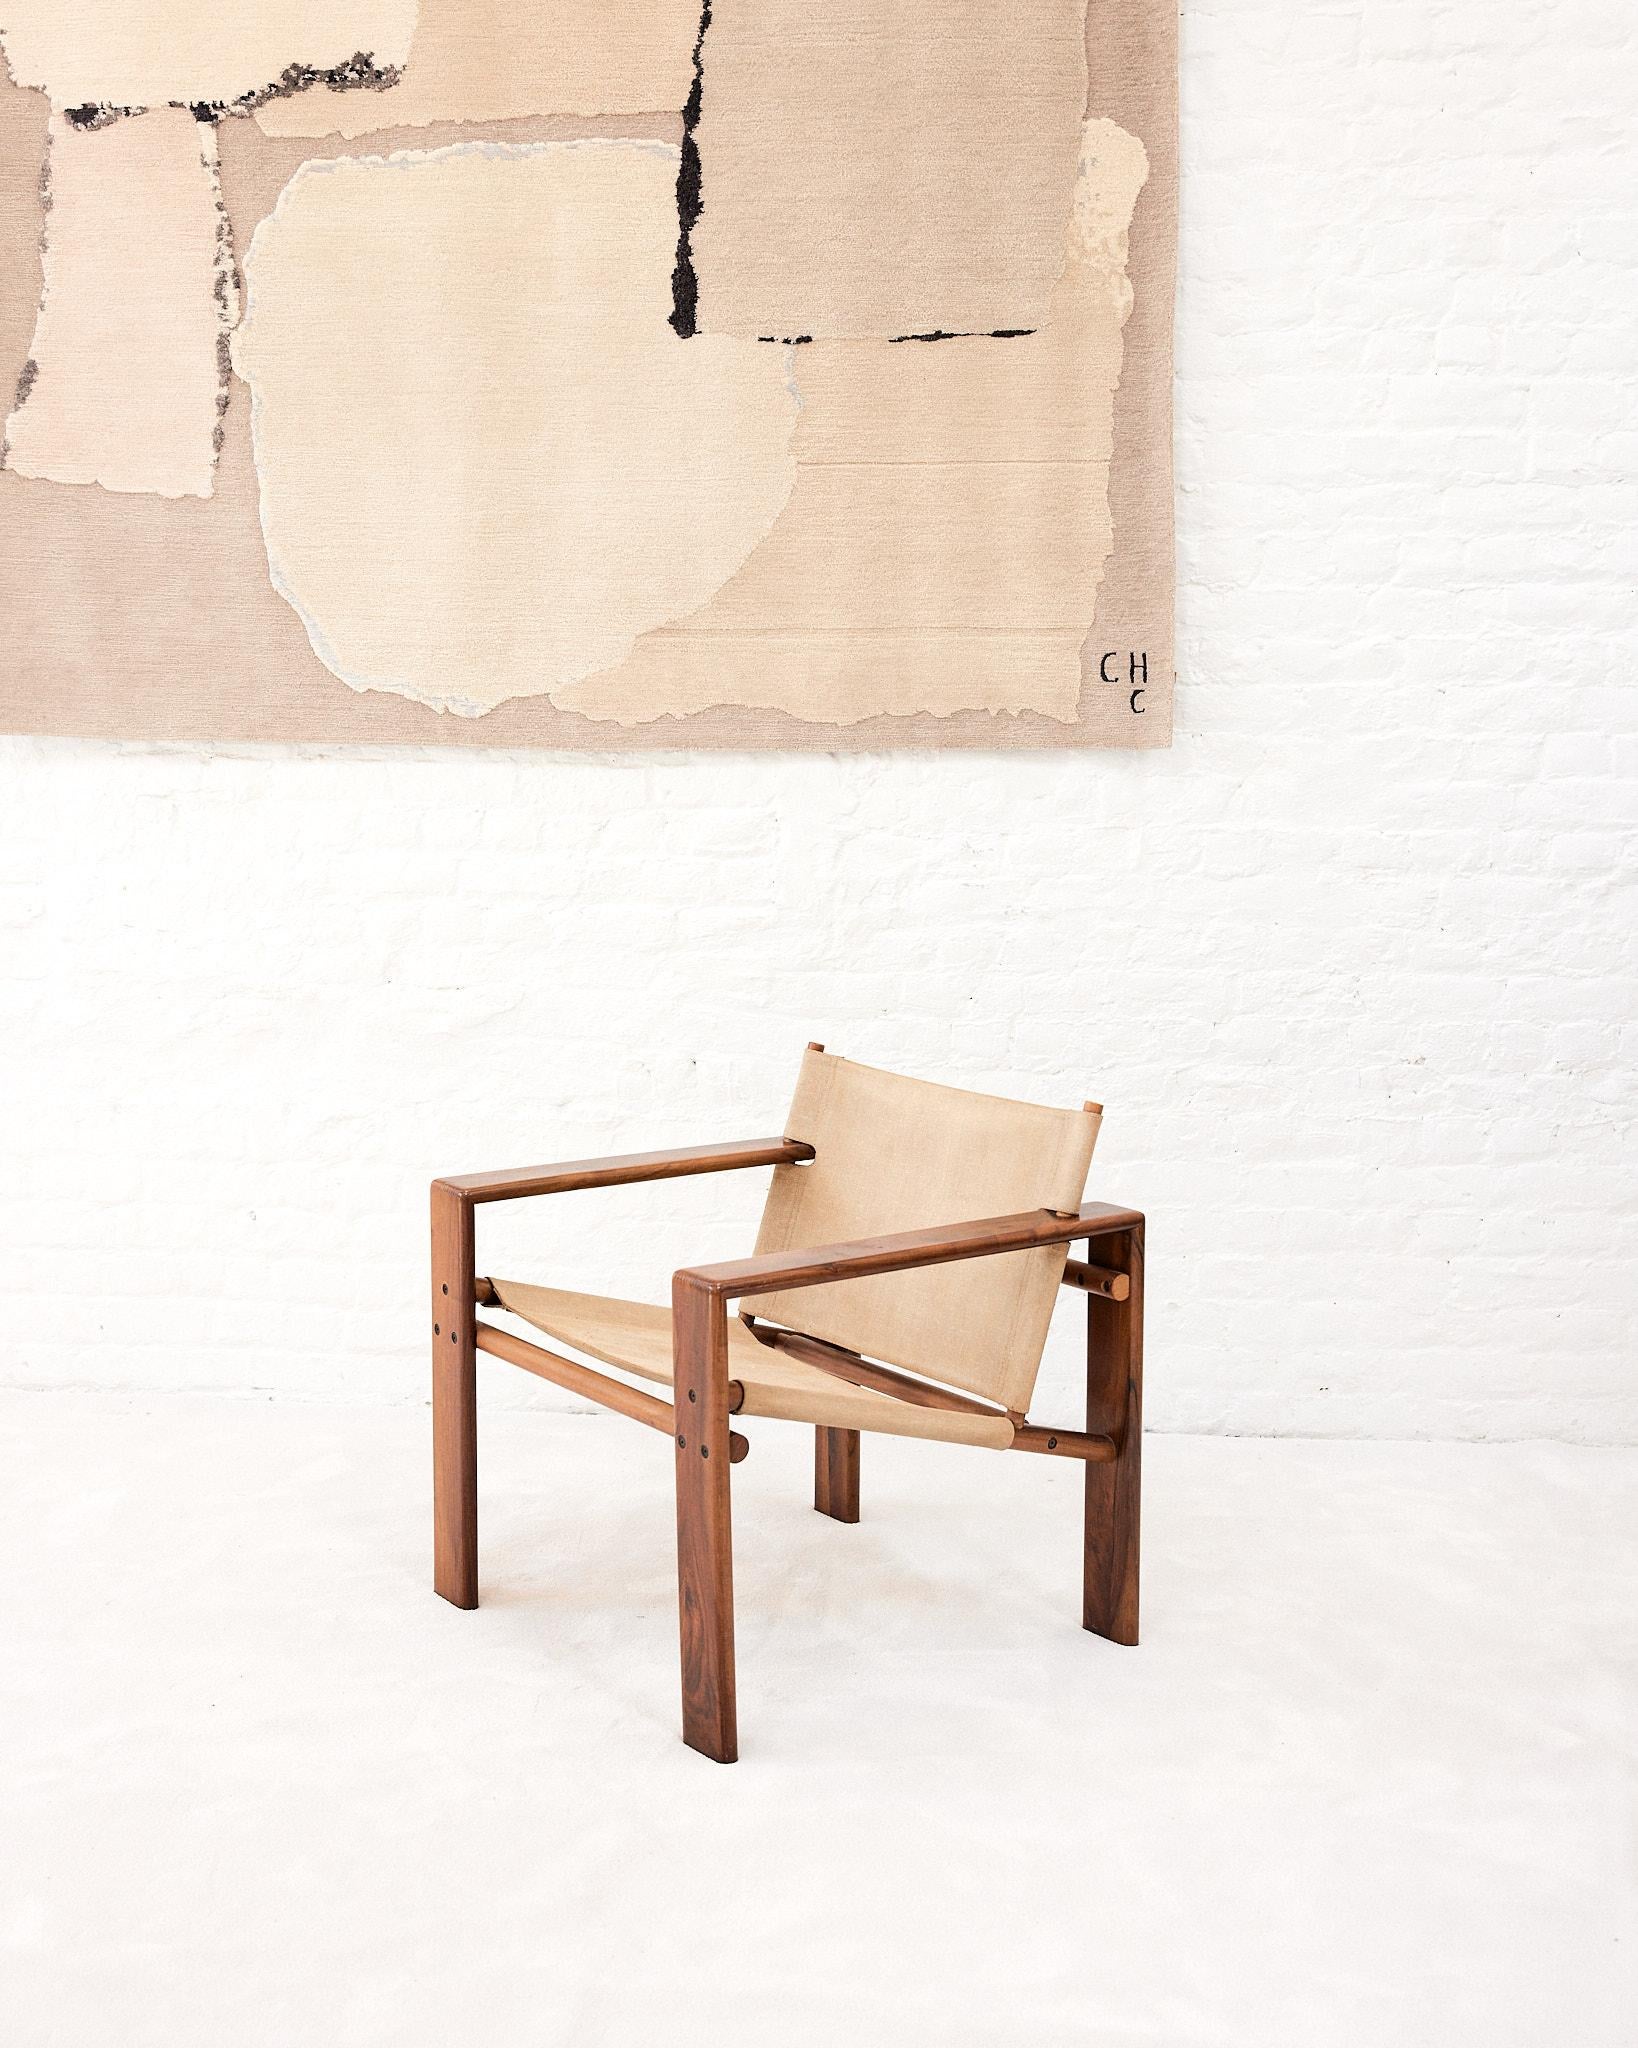 Italian 1970s armchair made with a wooden structure, raw hemp seat, and backseat, produced by Mobilgirgi for Cantu. The chair is made by the self taught craftsman and designer Tarcisio Colzani. His professional career began in the technical office